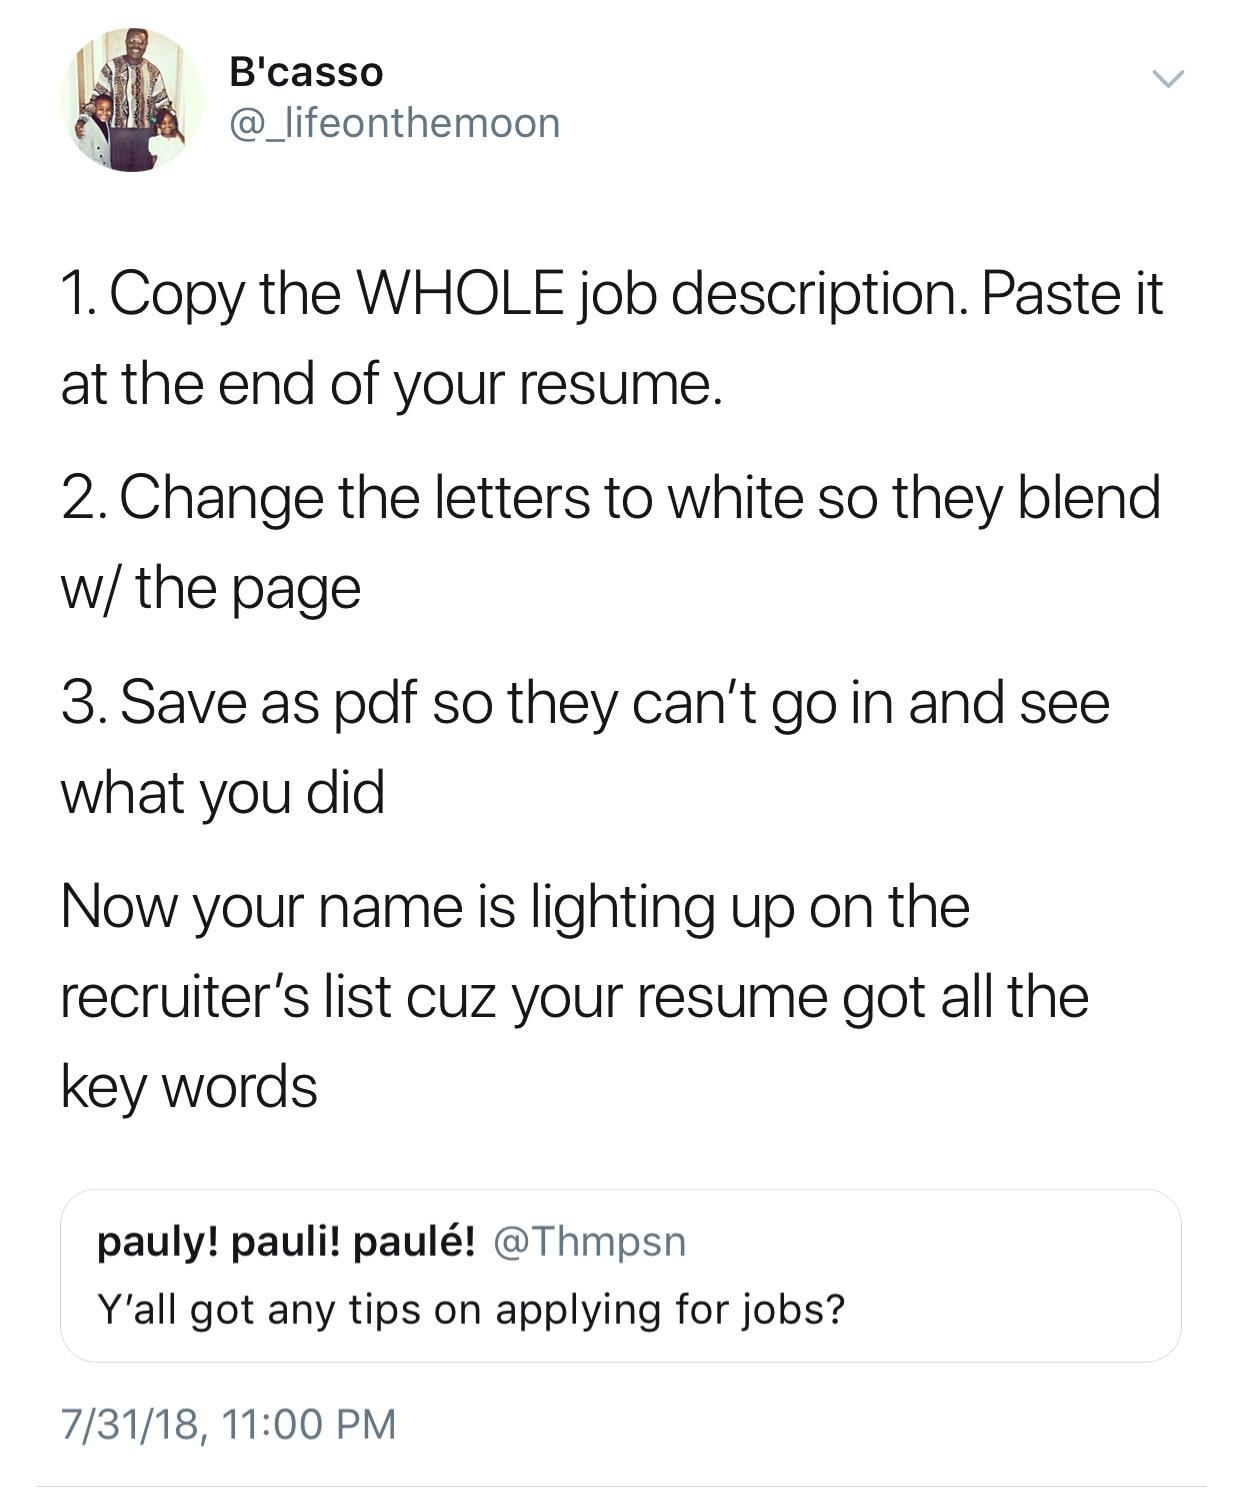 funny job descriptions - B'casso 1. Copy the Whole job description. Paste it at the end of your resume. 2. Change the letters to white so they blend w the page 3. Save as pdf so they can't go in and see what you did Now your name is lighting up on the rec